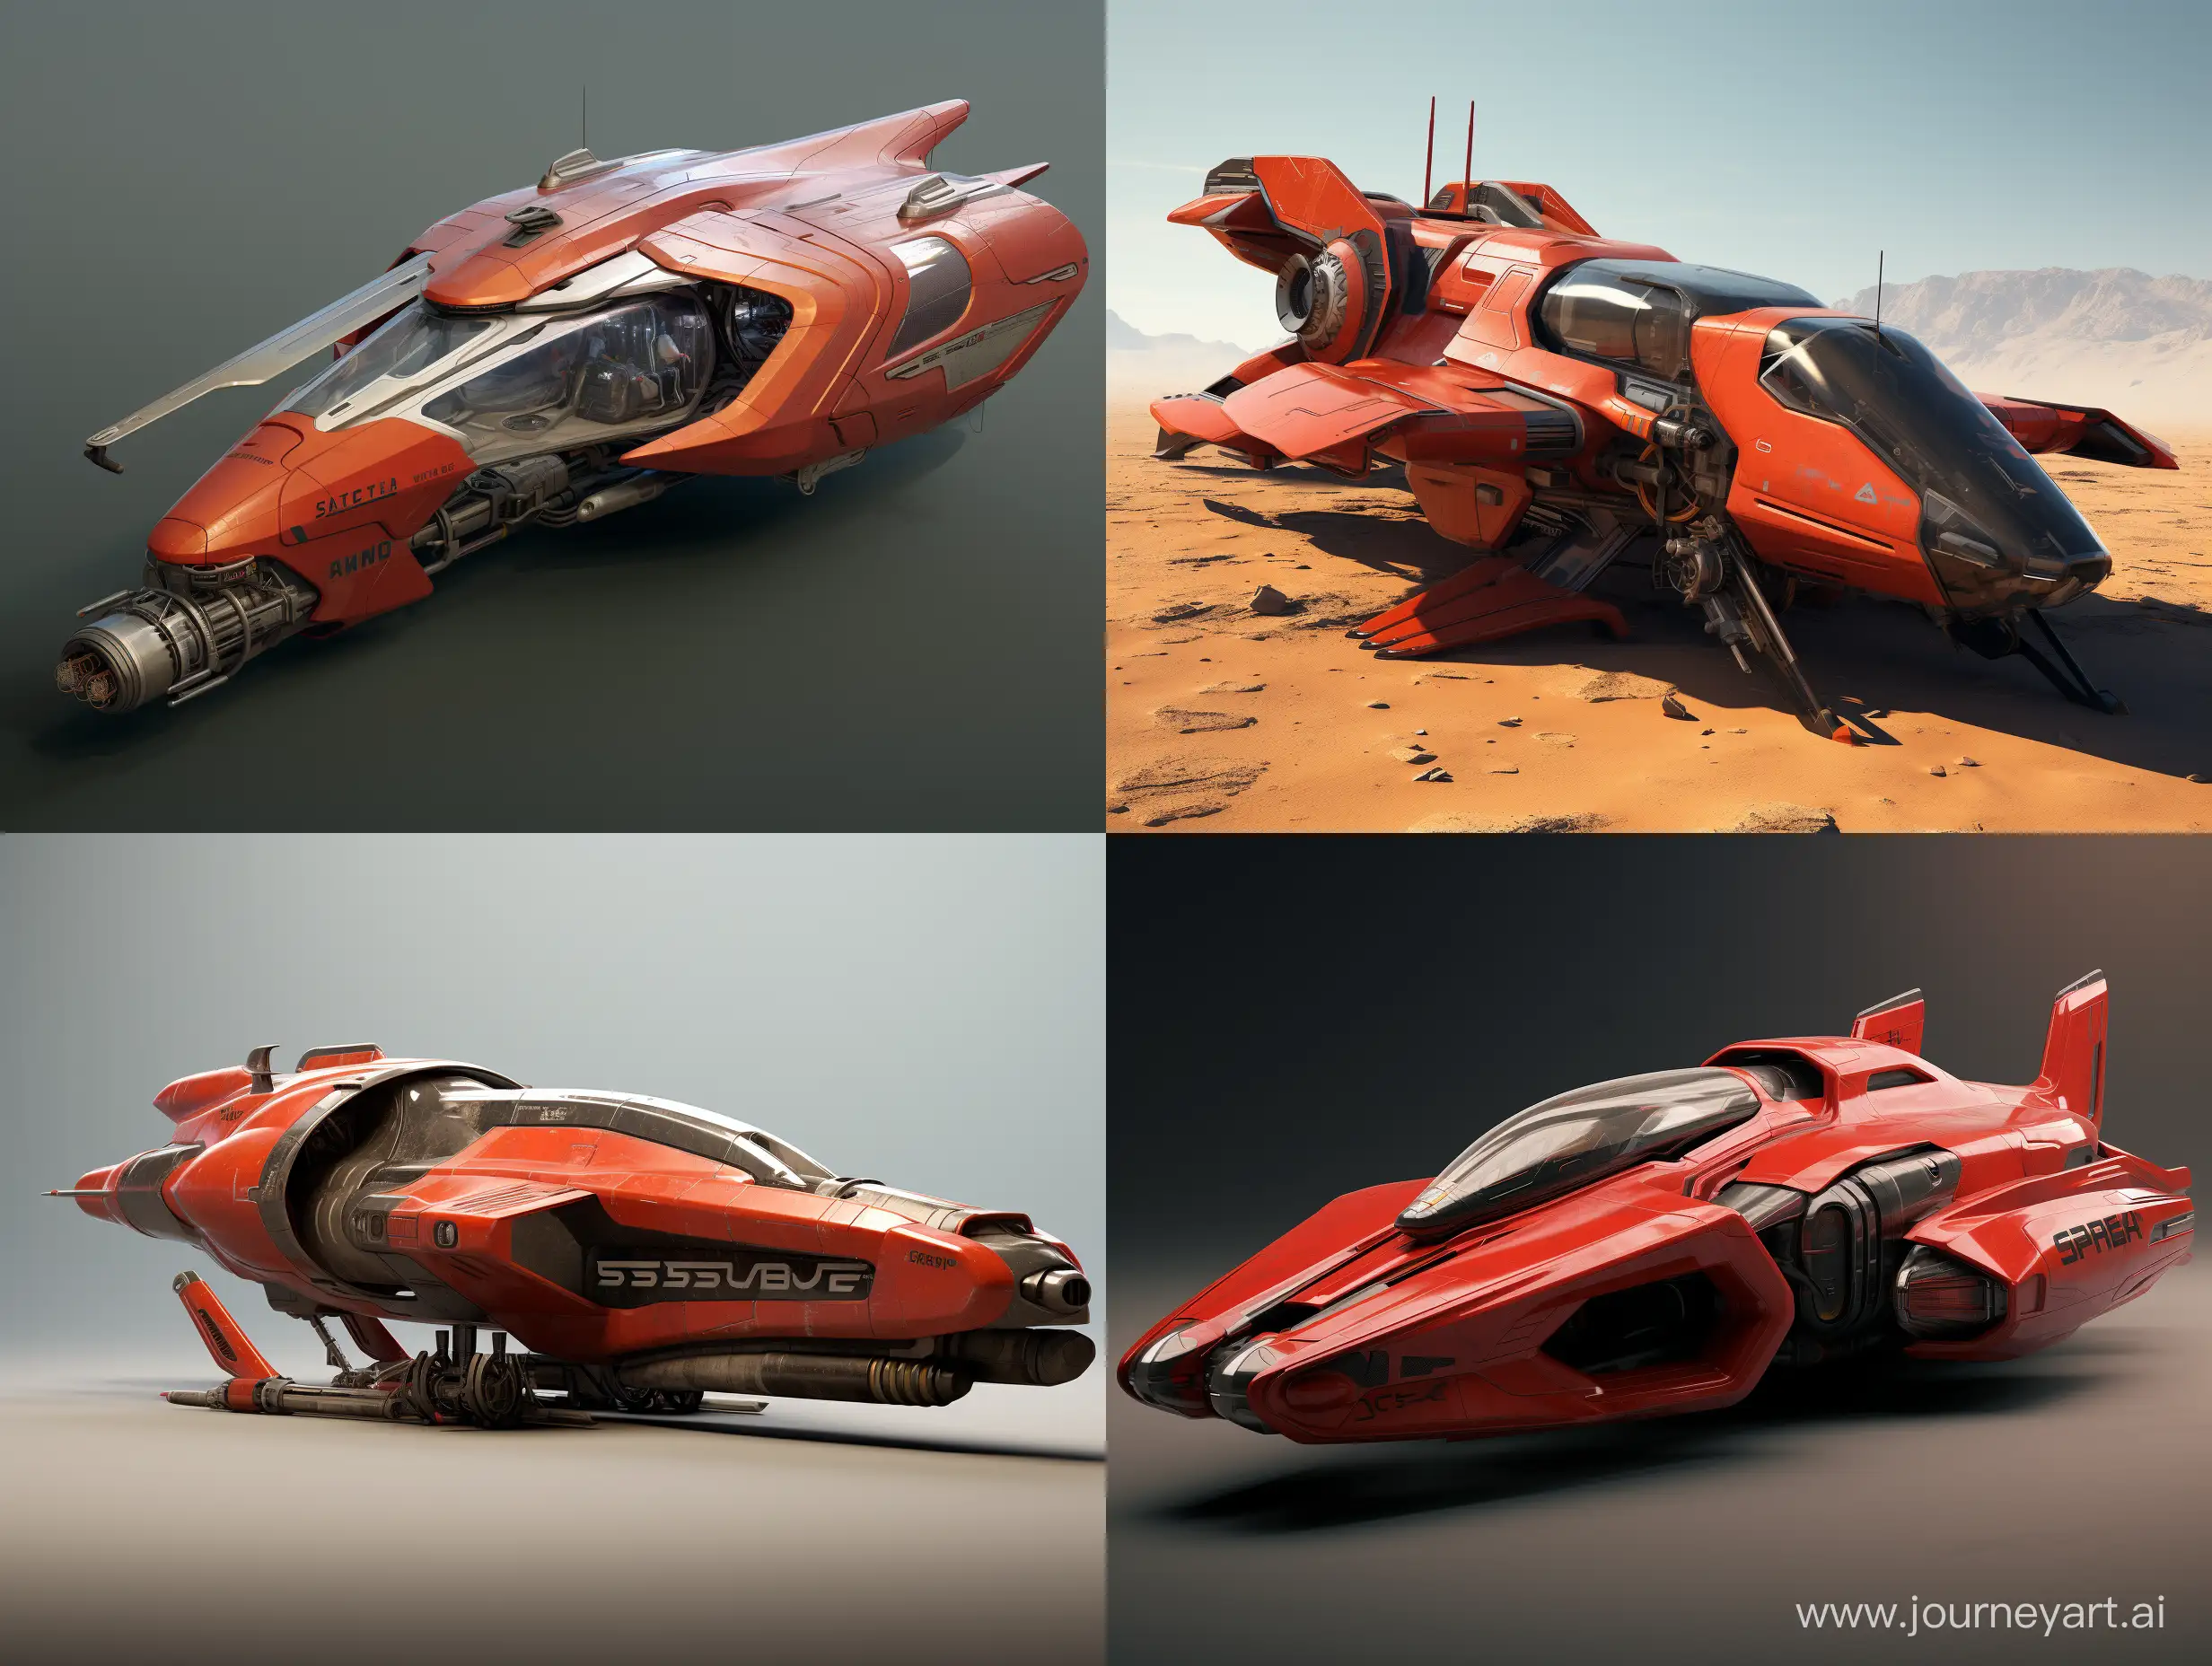 Retro-SciFi-Red-Sport-Research-Spacecraft-with-Industrial-Details